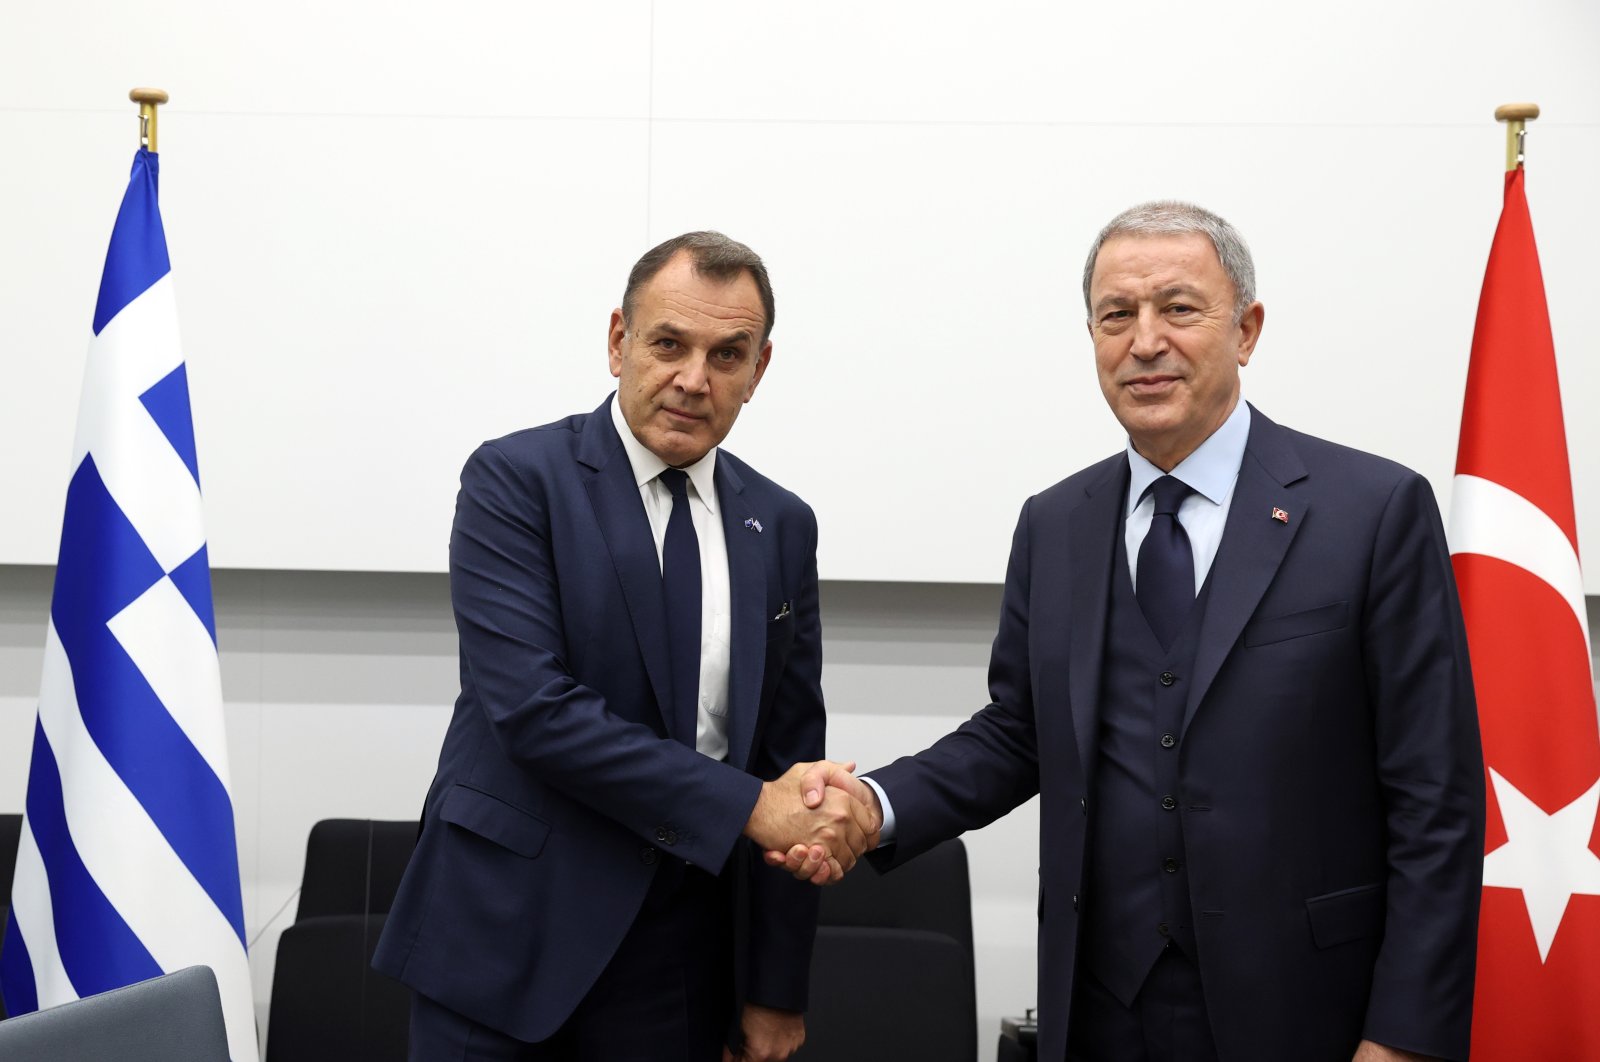 Defense Minister Hulusi Akar and Greek counterpart Nikolaos Panagiotopoulos shake hands after a meeting in Brussels, Belgium, Oct. 13, 2022. (AA Photo)